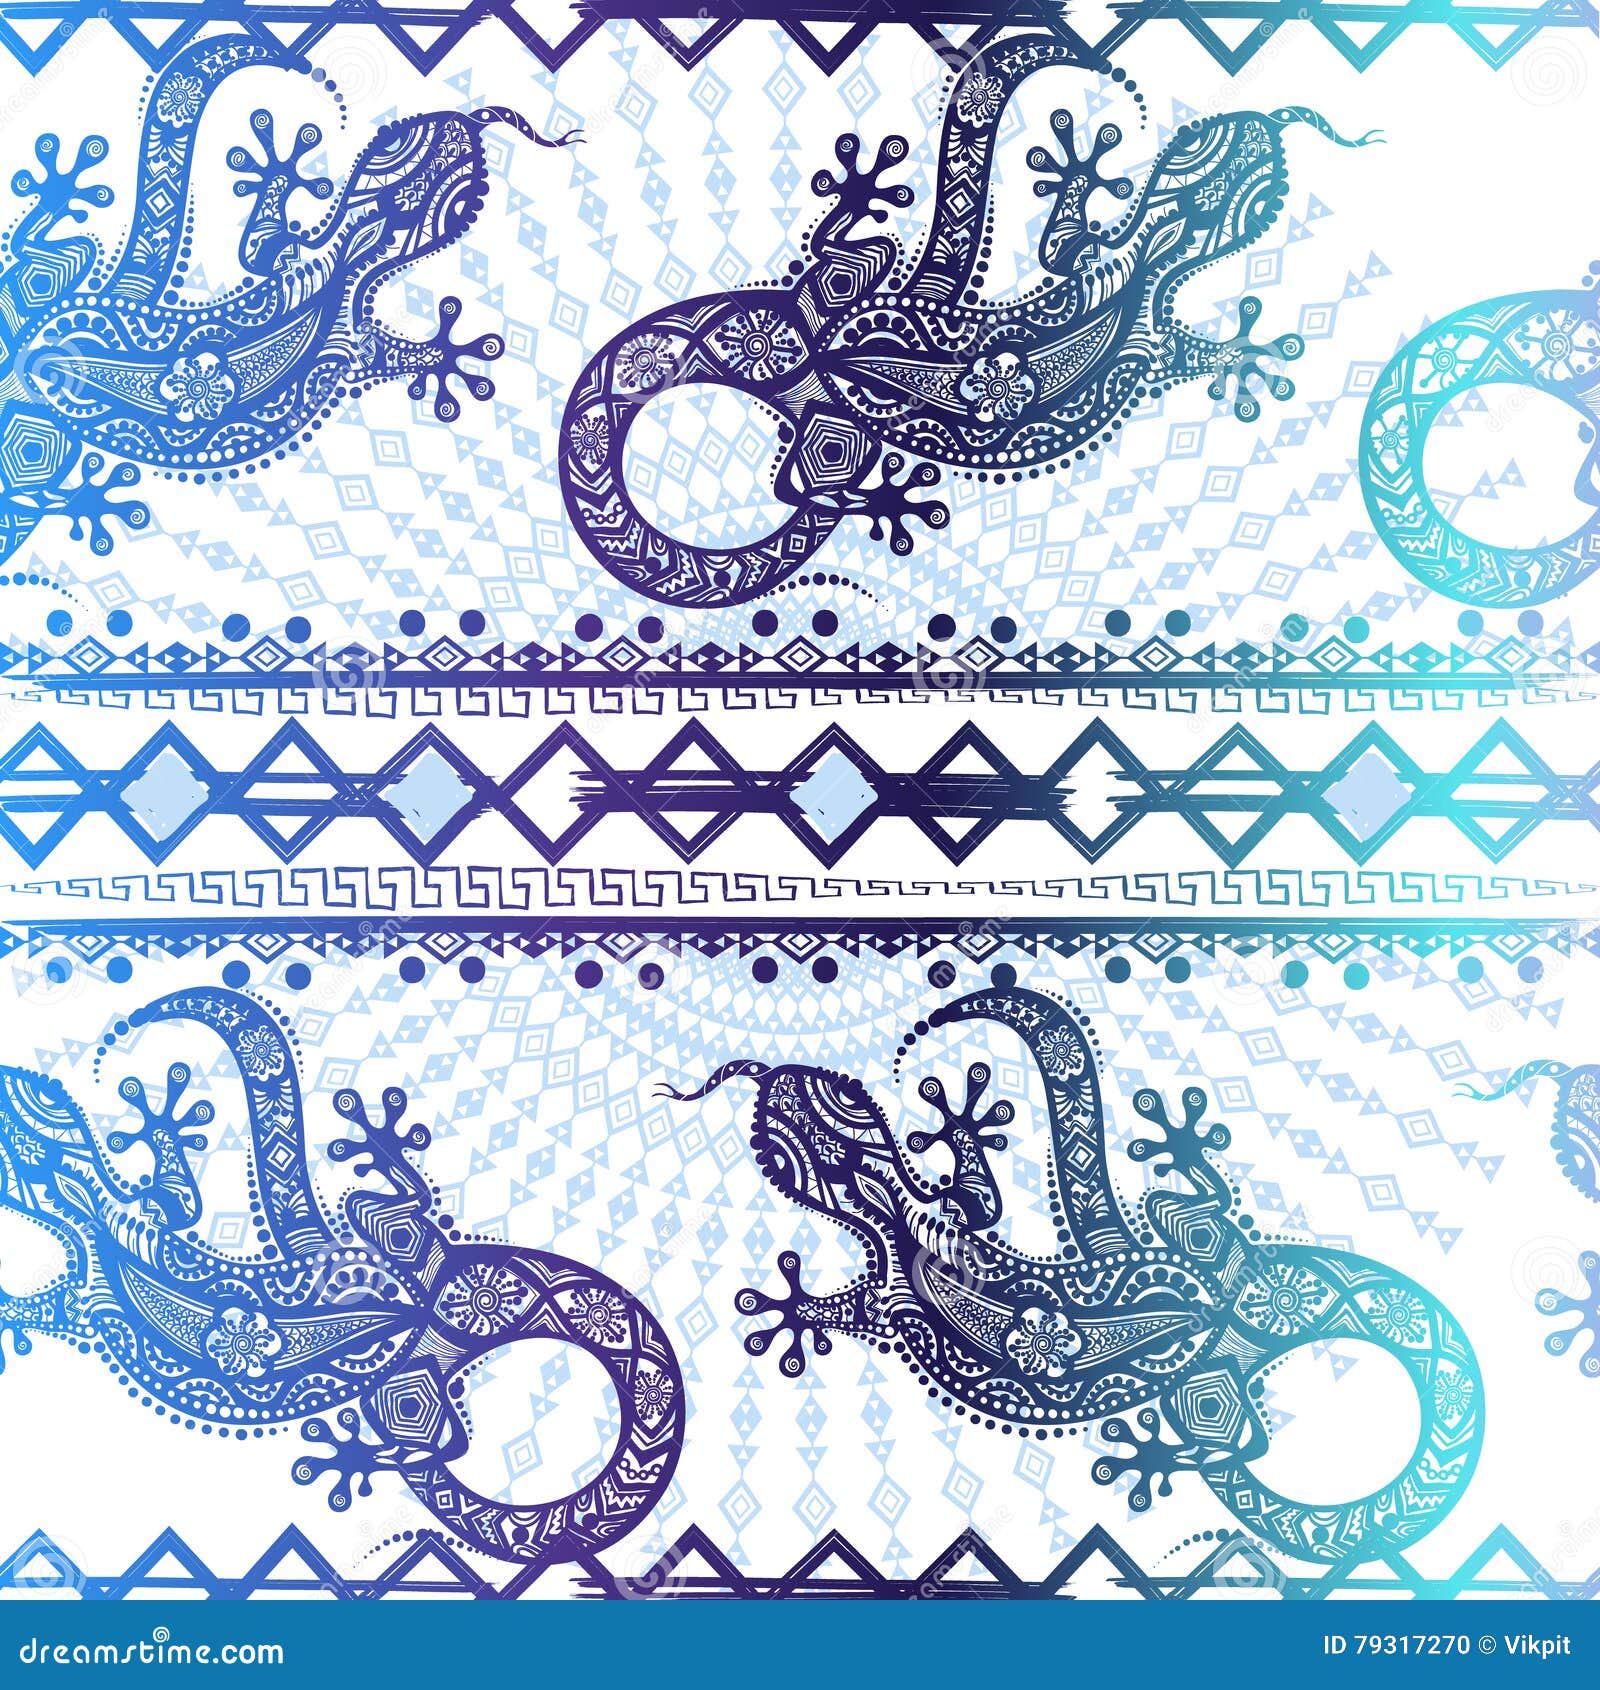  vintage seamless ethnic pattern image lizards and lines